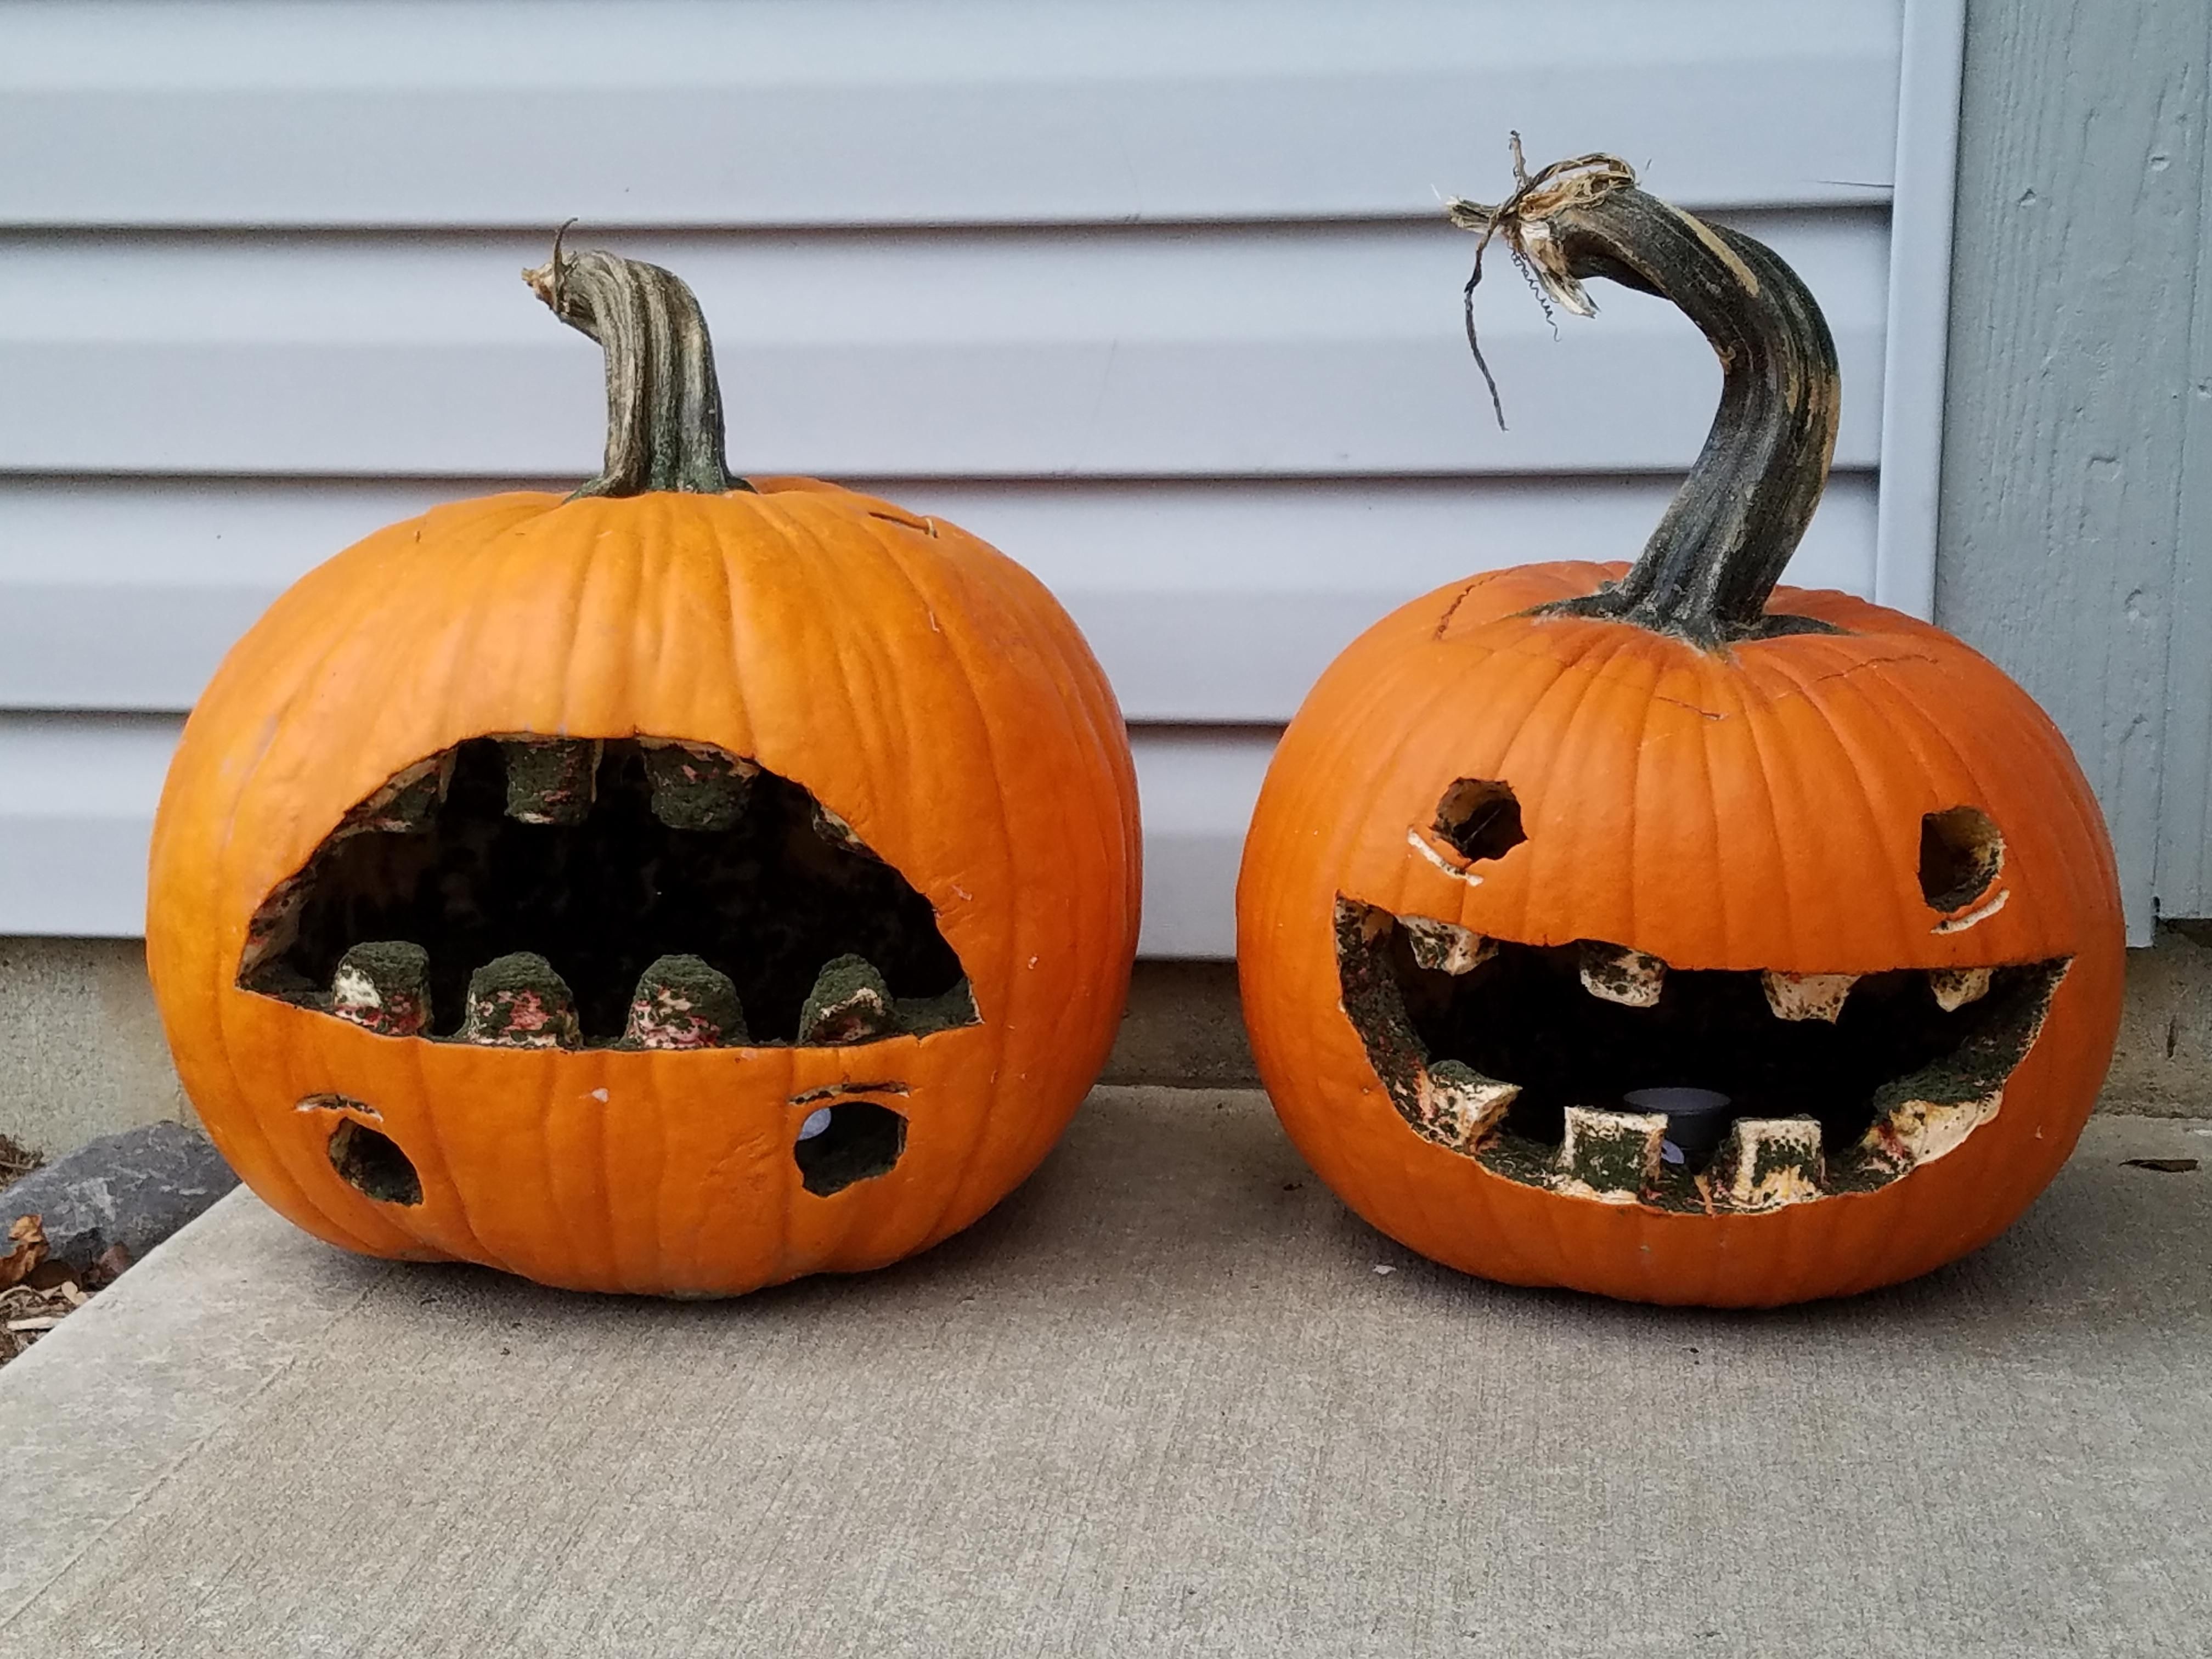 My fiance and I made pumpkins like one we saw on here, but they've started to rot. Now our pumpkins look like a couple of crazy meth heads.